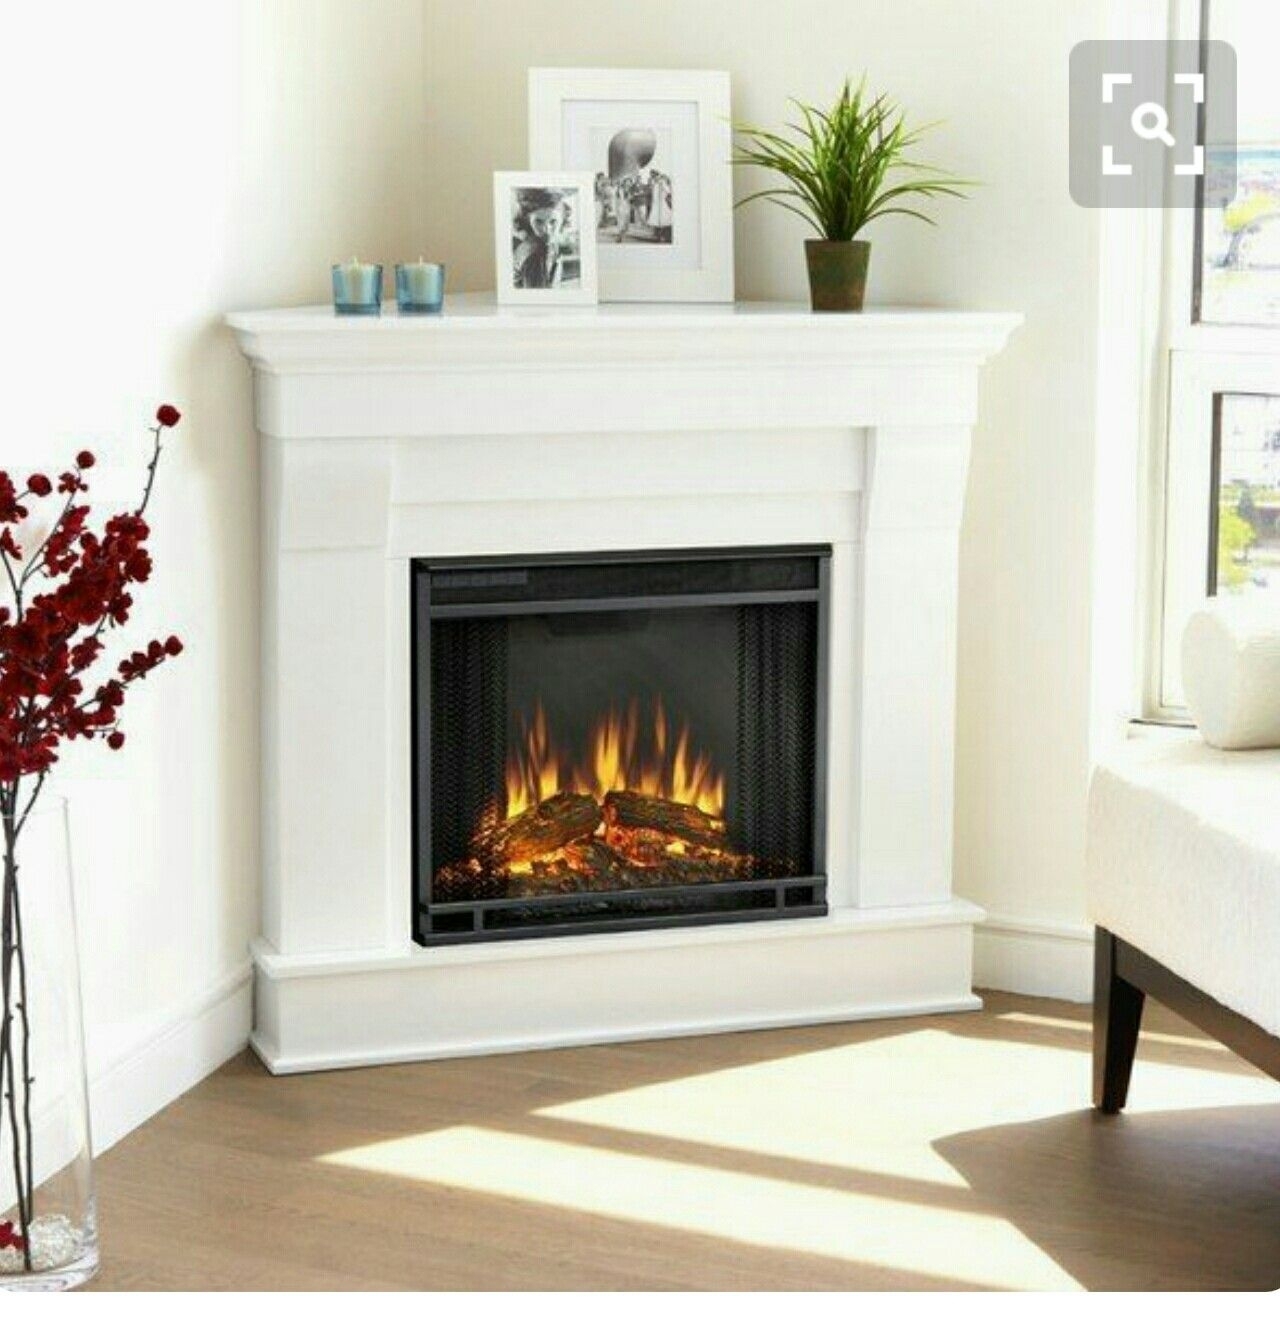 Corner Ventless Gas Fireplace You'll Love in 2020 - VisualHunt